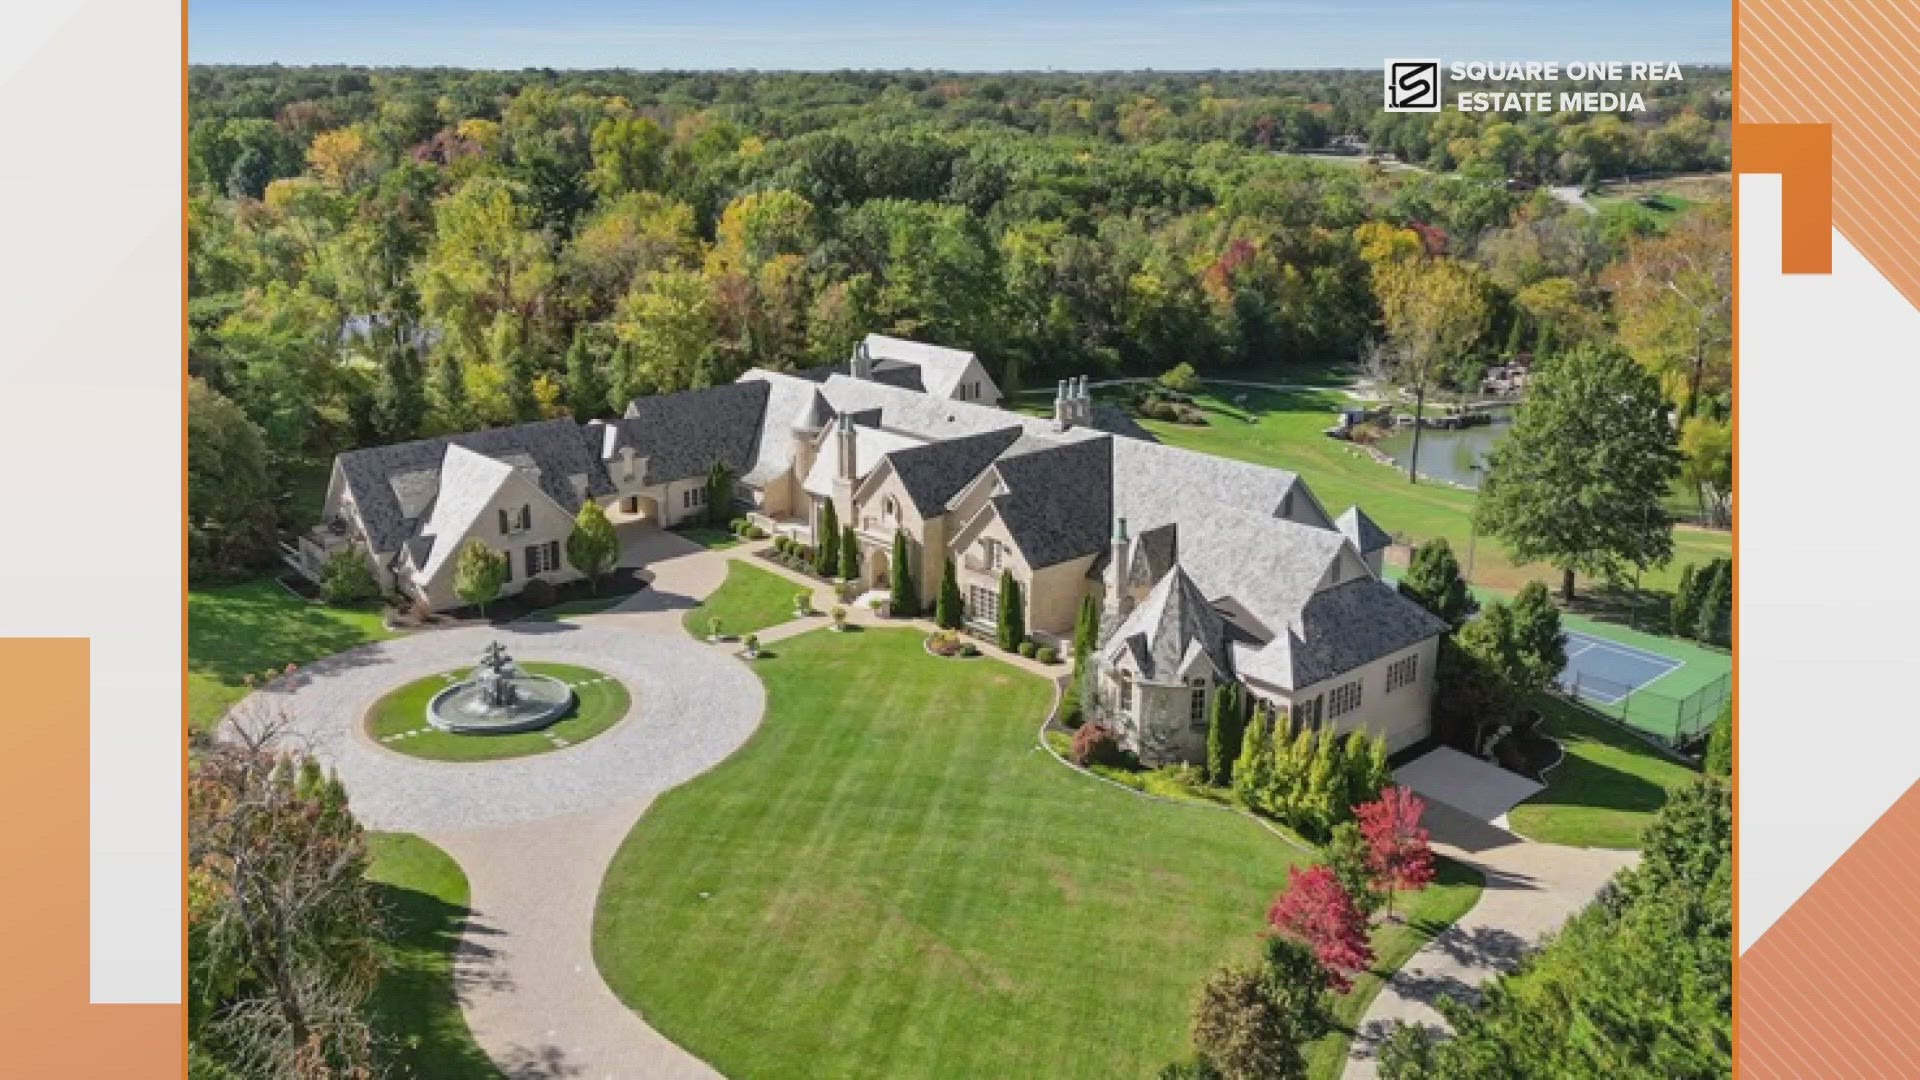 The French-inspired home has luxury features. The 7.5-acre estate is located near Ladue's border with the Huntleigh suburb.